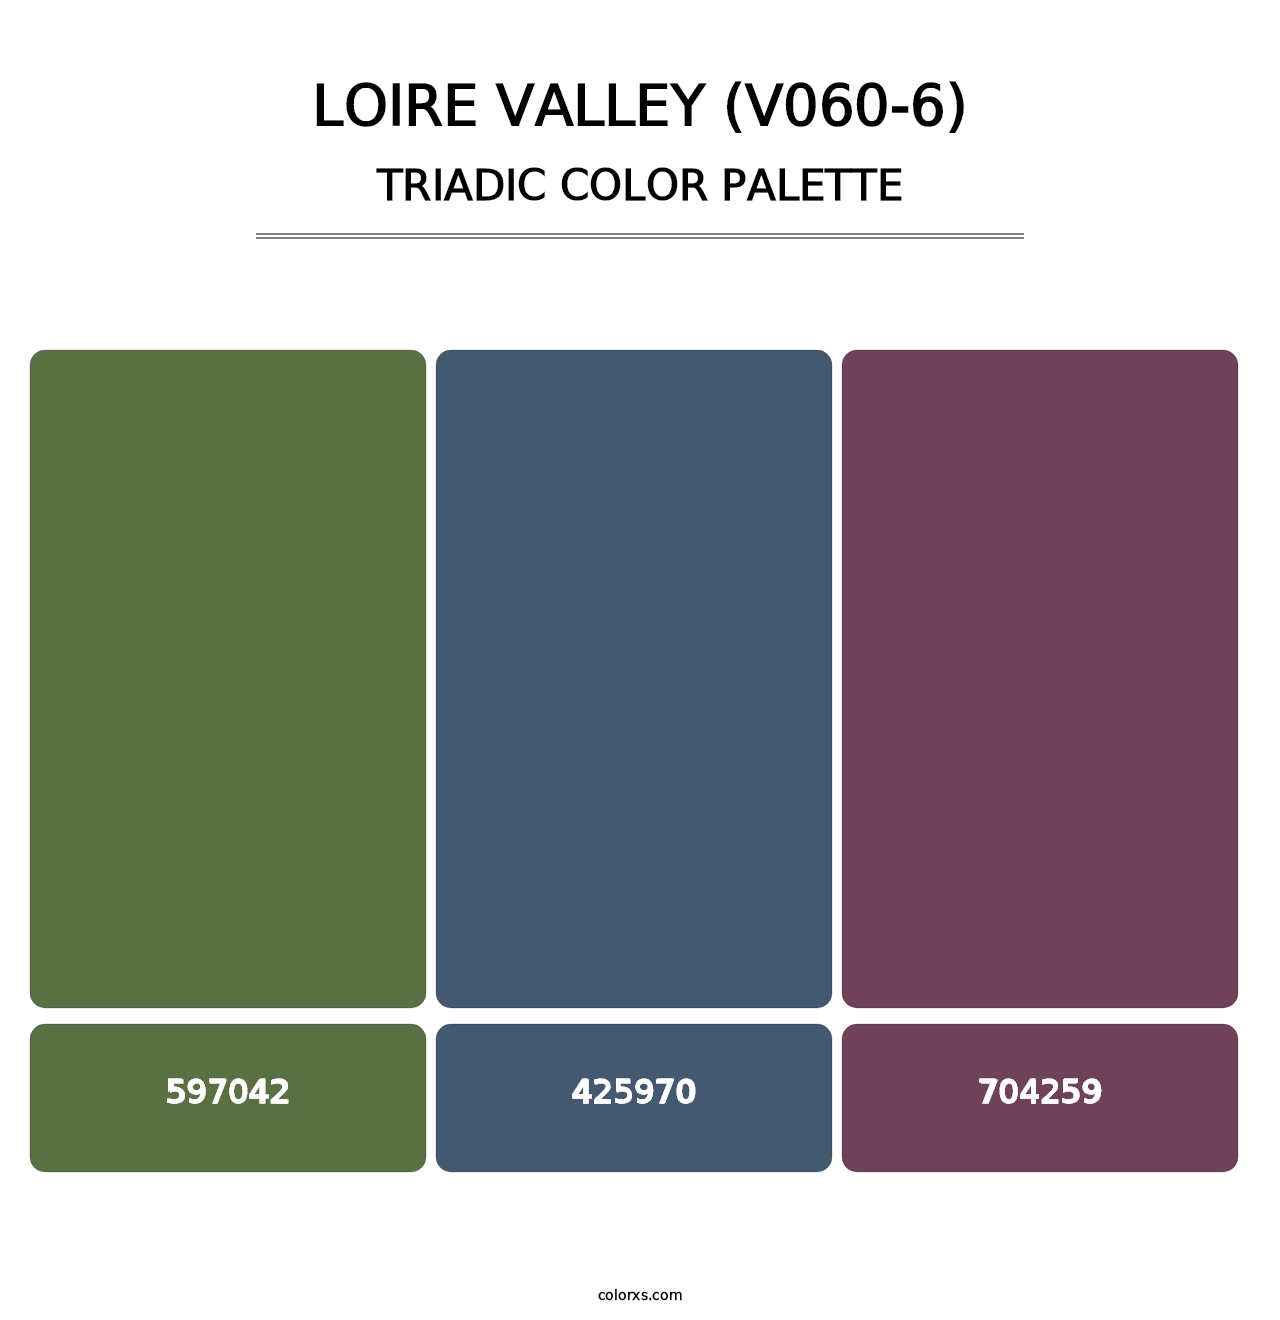 Loire Valley (V060-6) - Triadic Color Palette